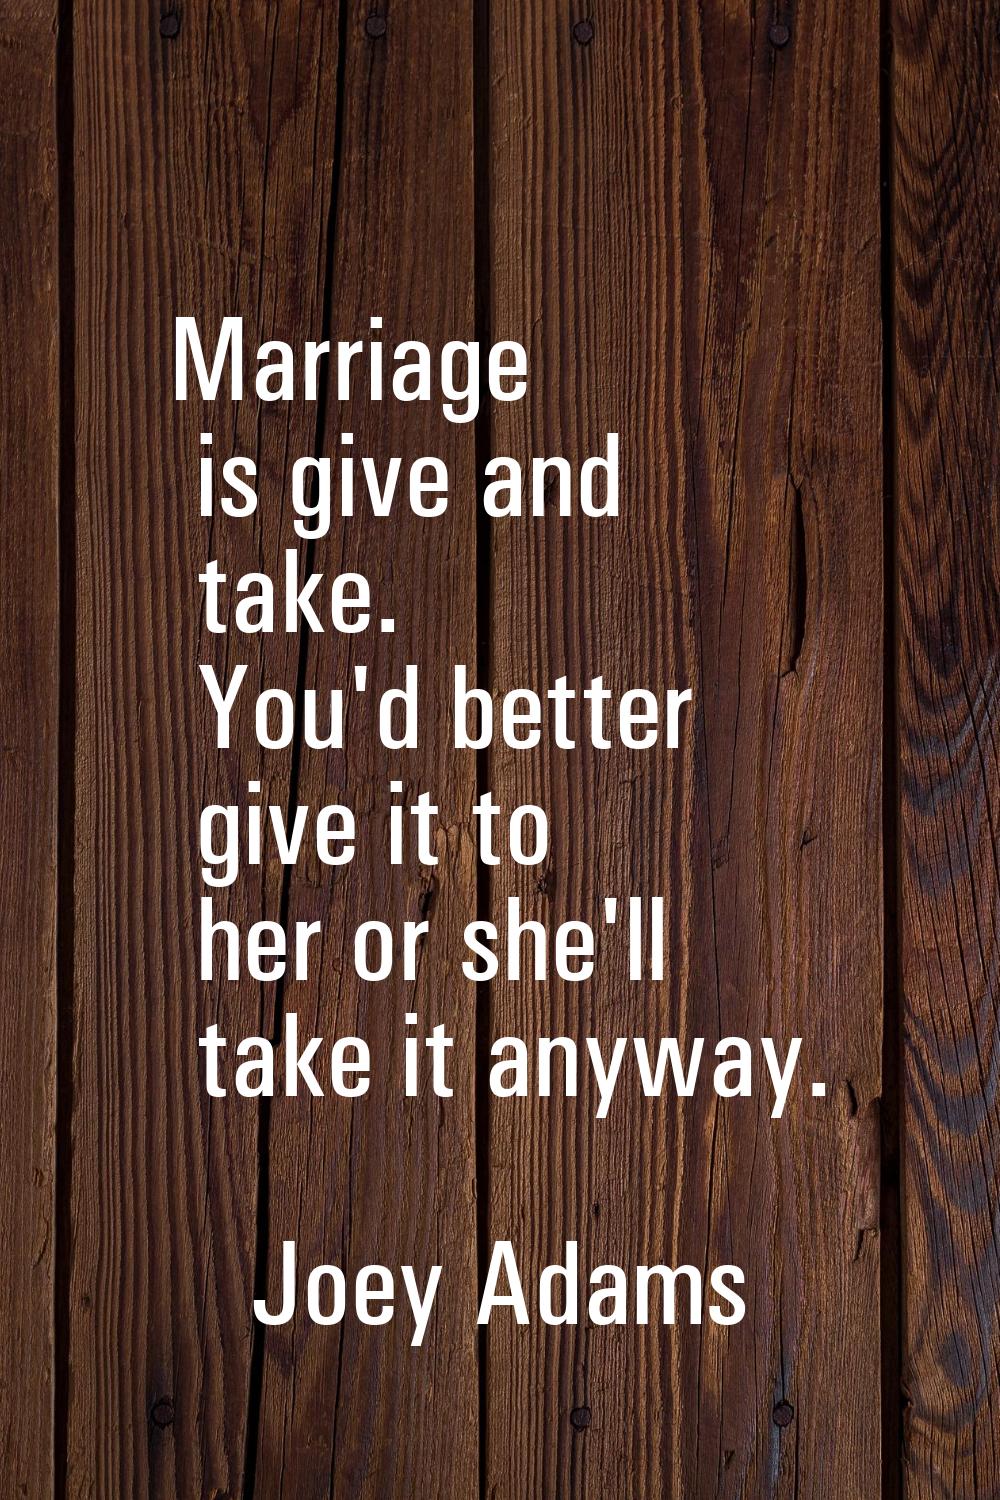 Marriage is give and take. You'd better give it to her or she'll take it anyway.